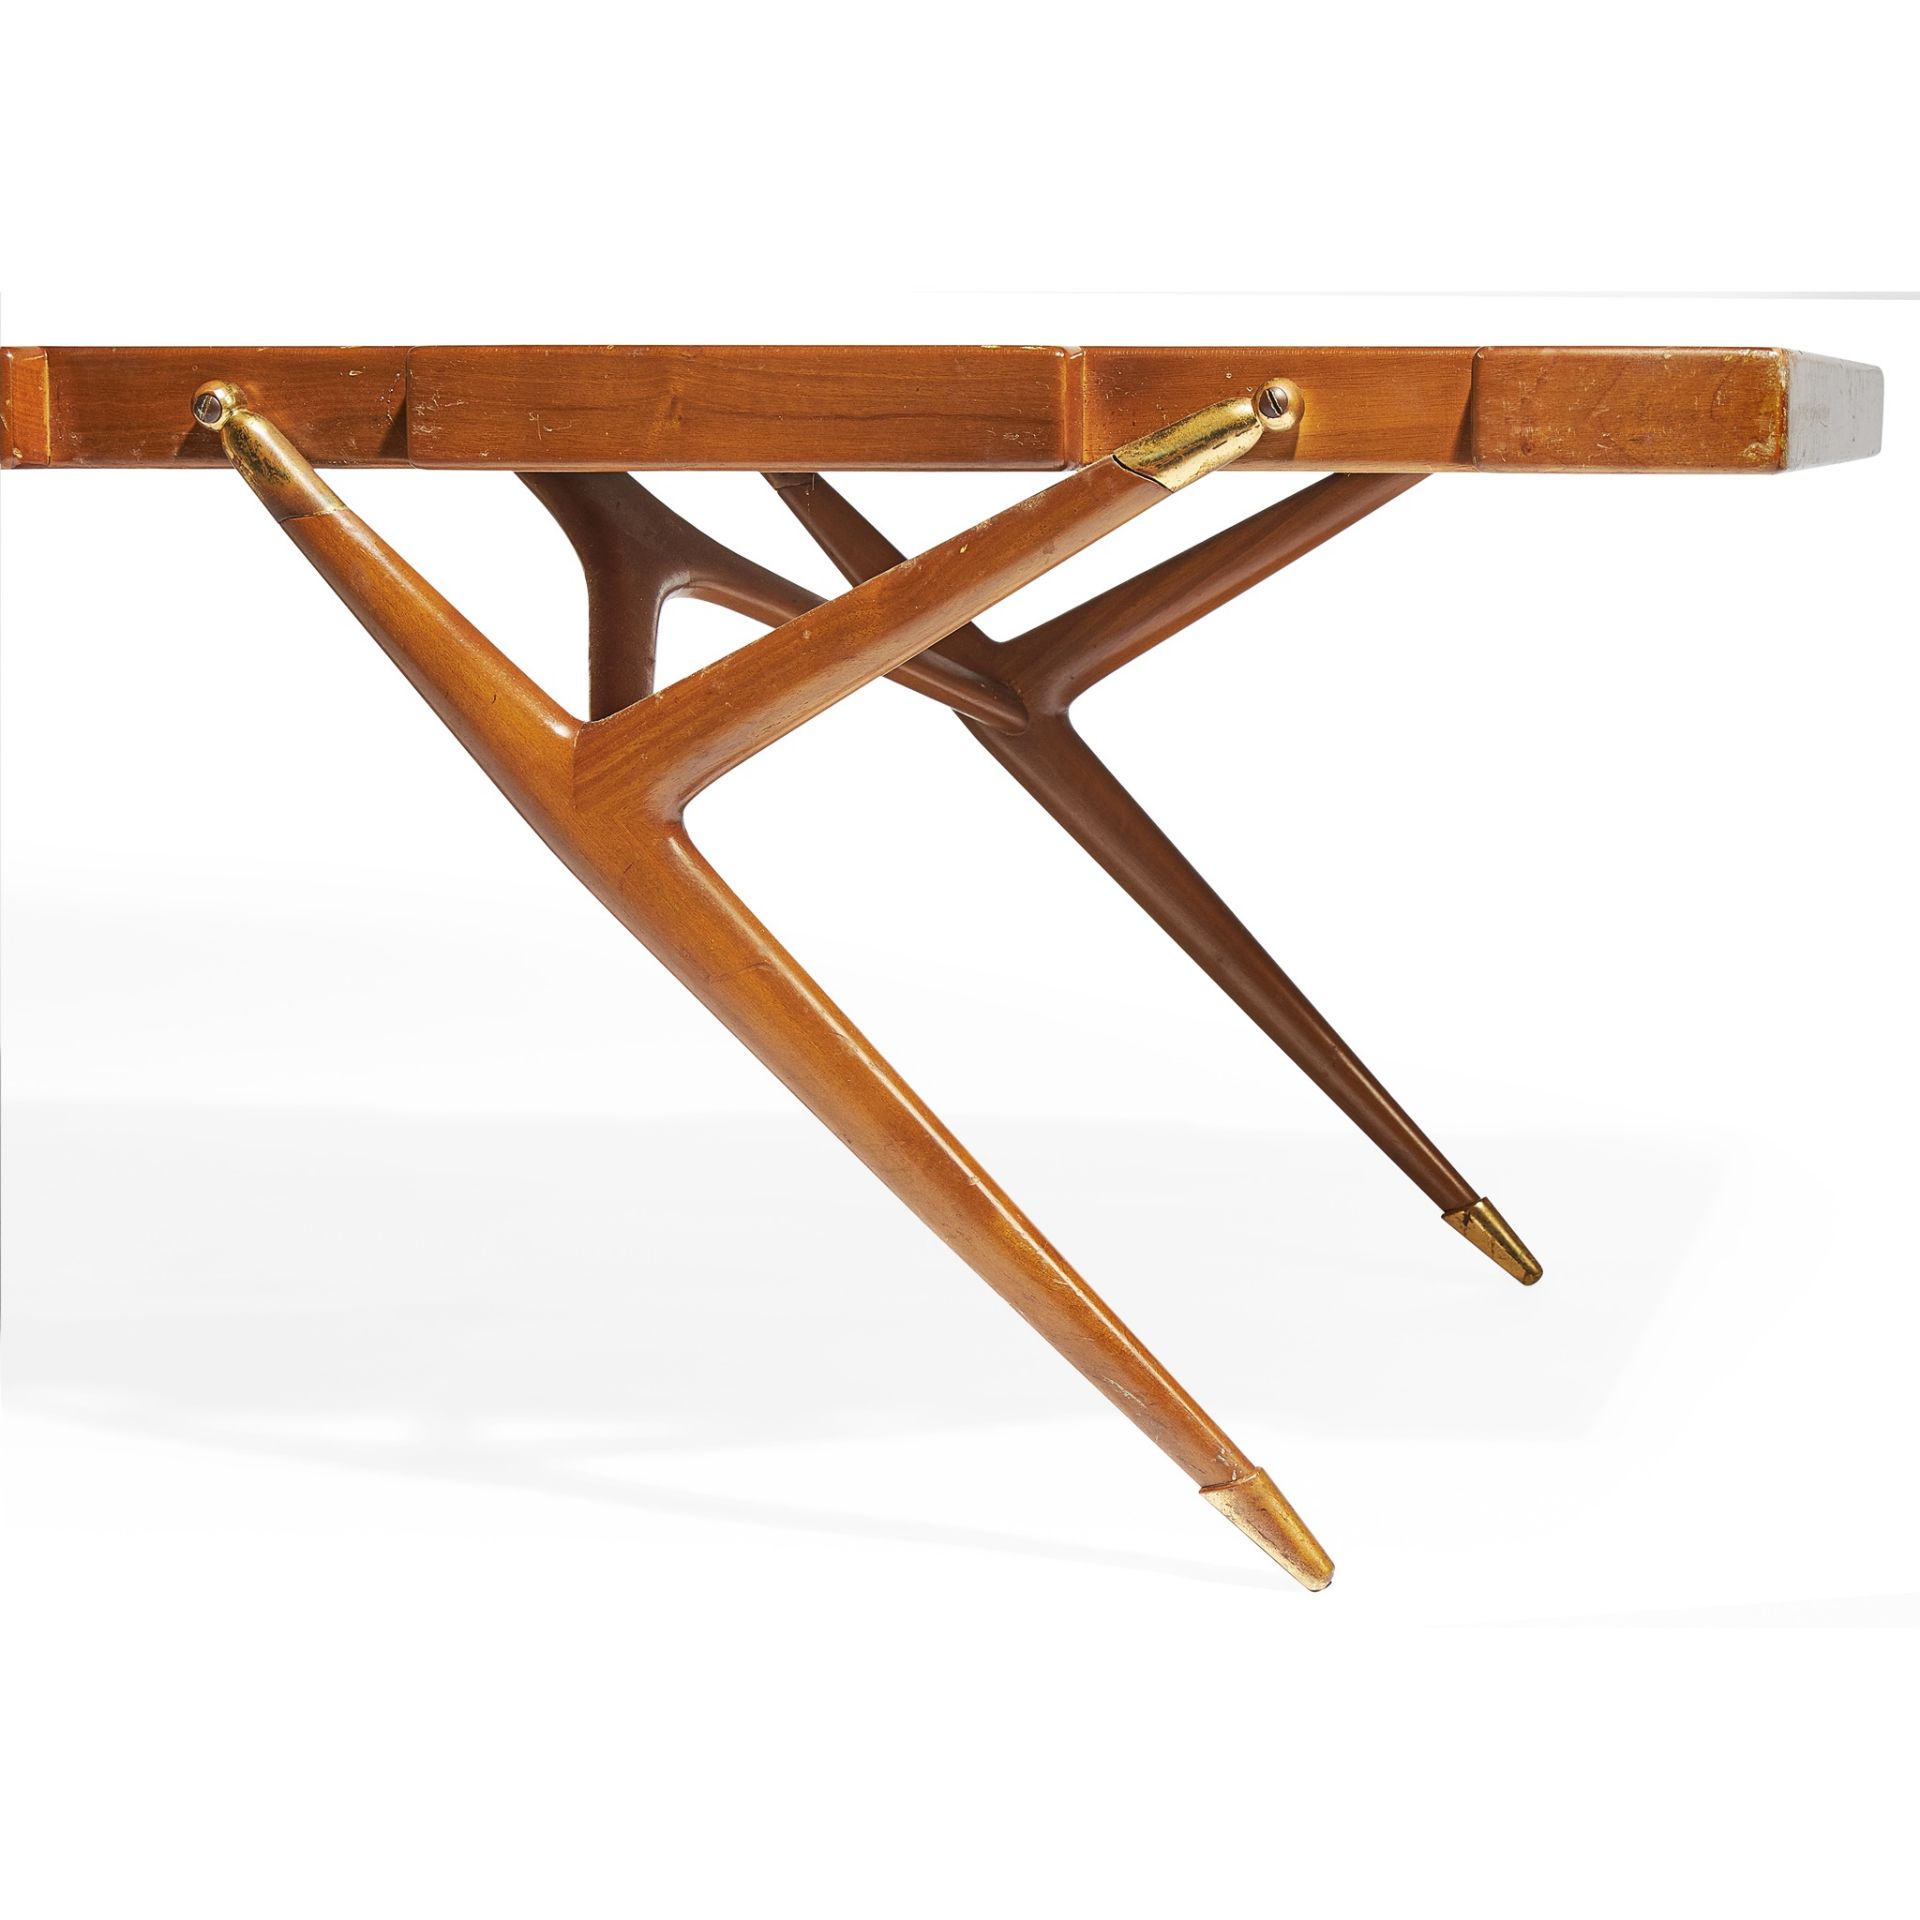 ICO PARISI (ITALIAN 1916-1996) FOR SINGER & SONS LOW TABLE, DESIGNED 1951 - Image 3 of 6